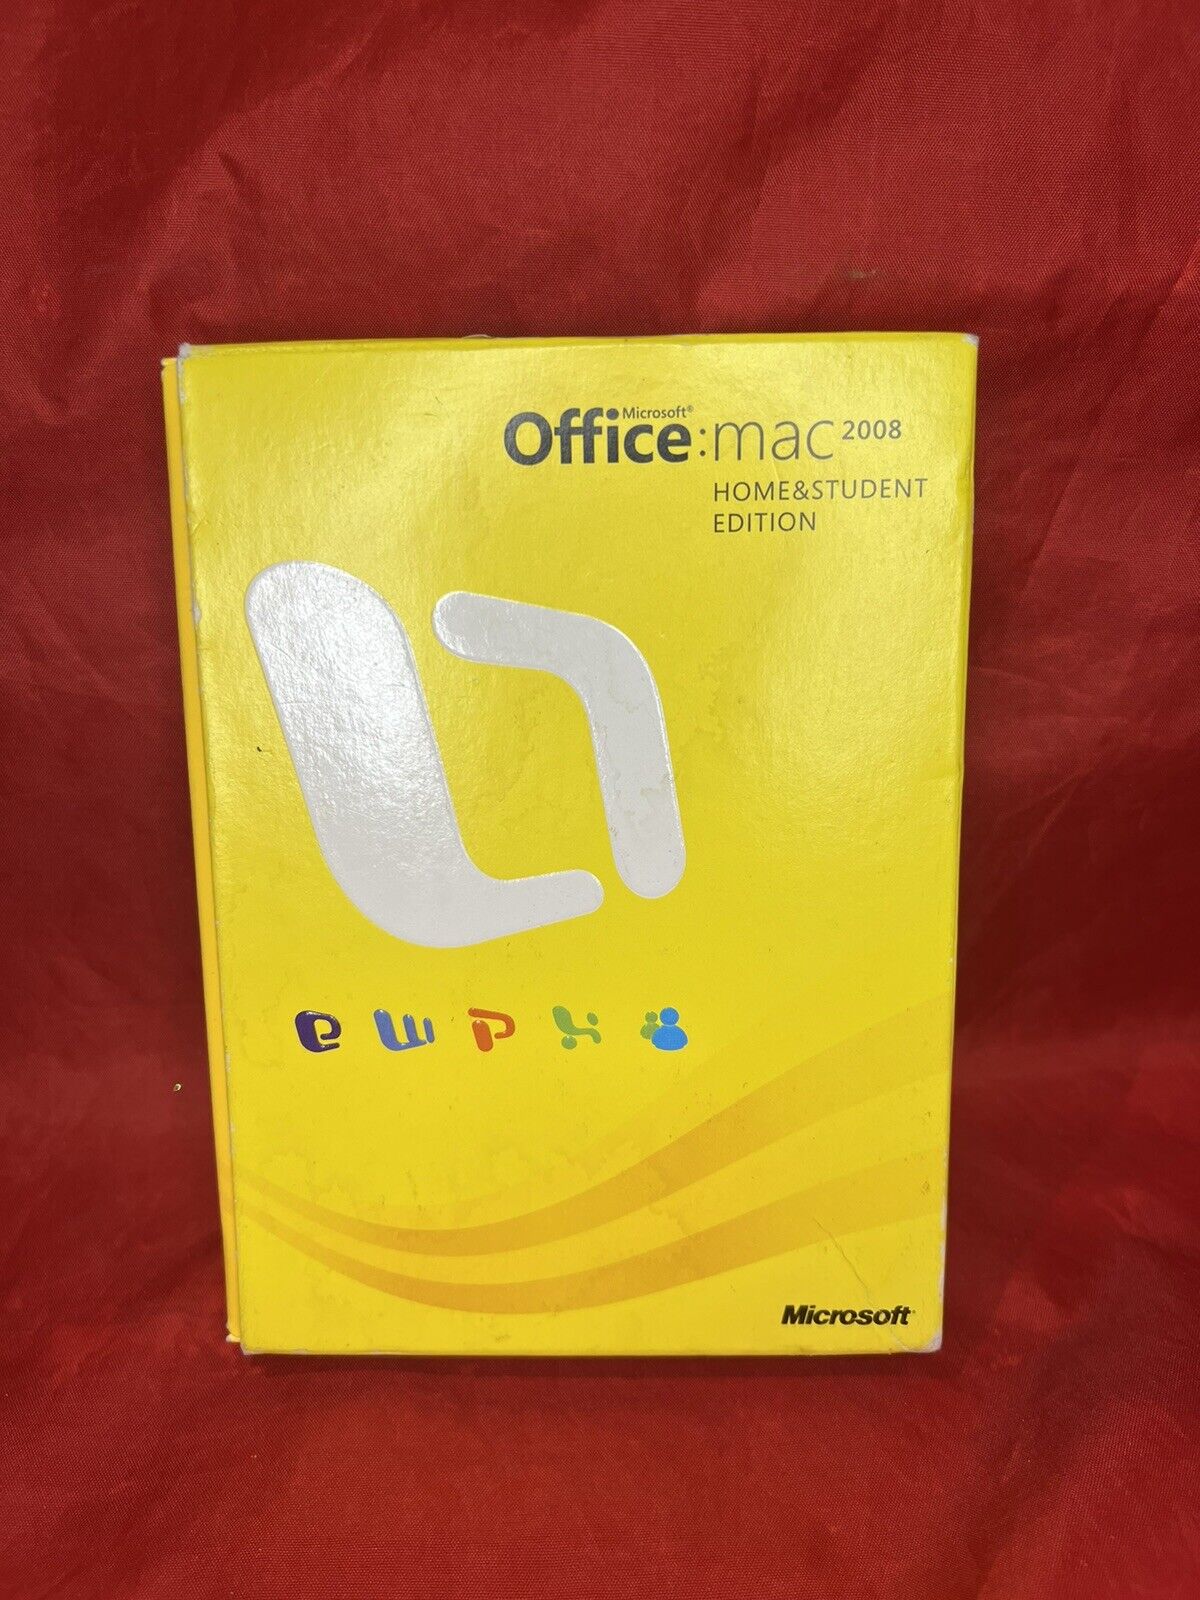 Microsoft Office 2008 for Mac Home and Student Edition for Mac Tested